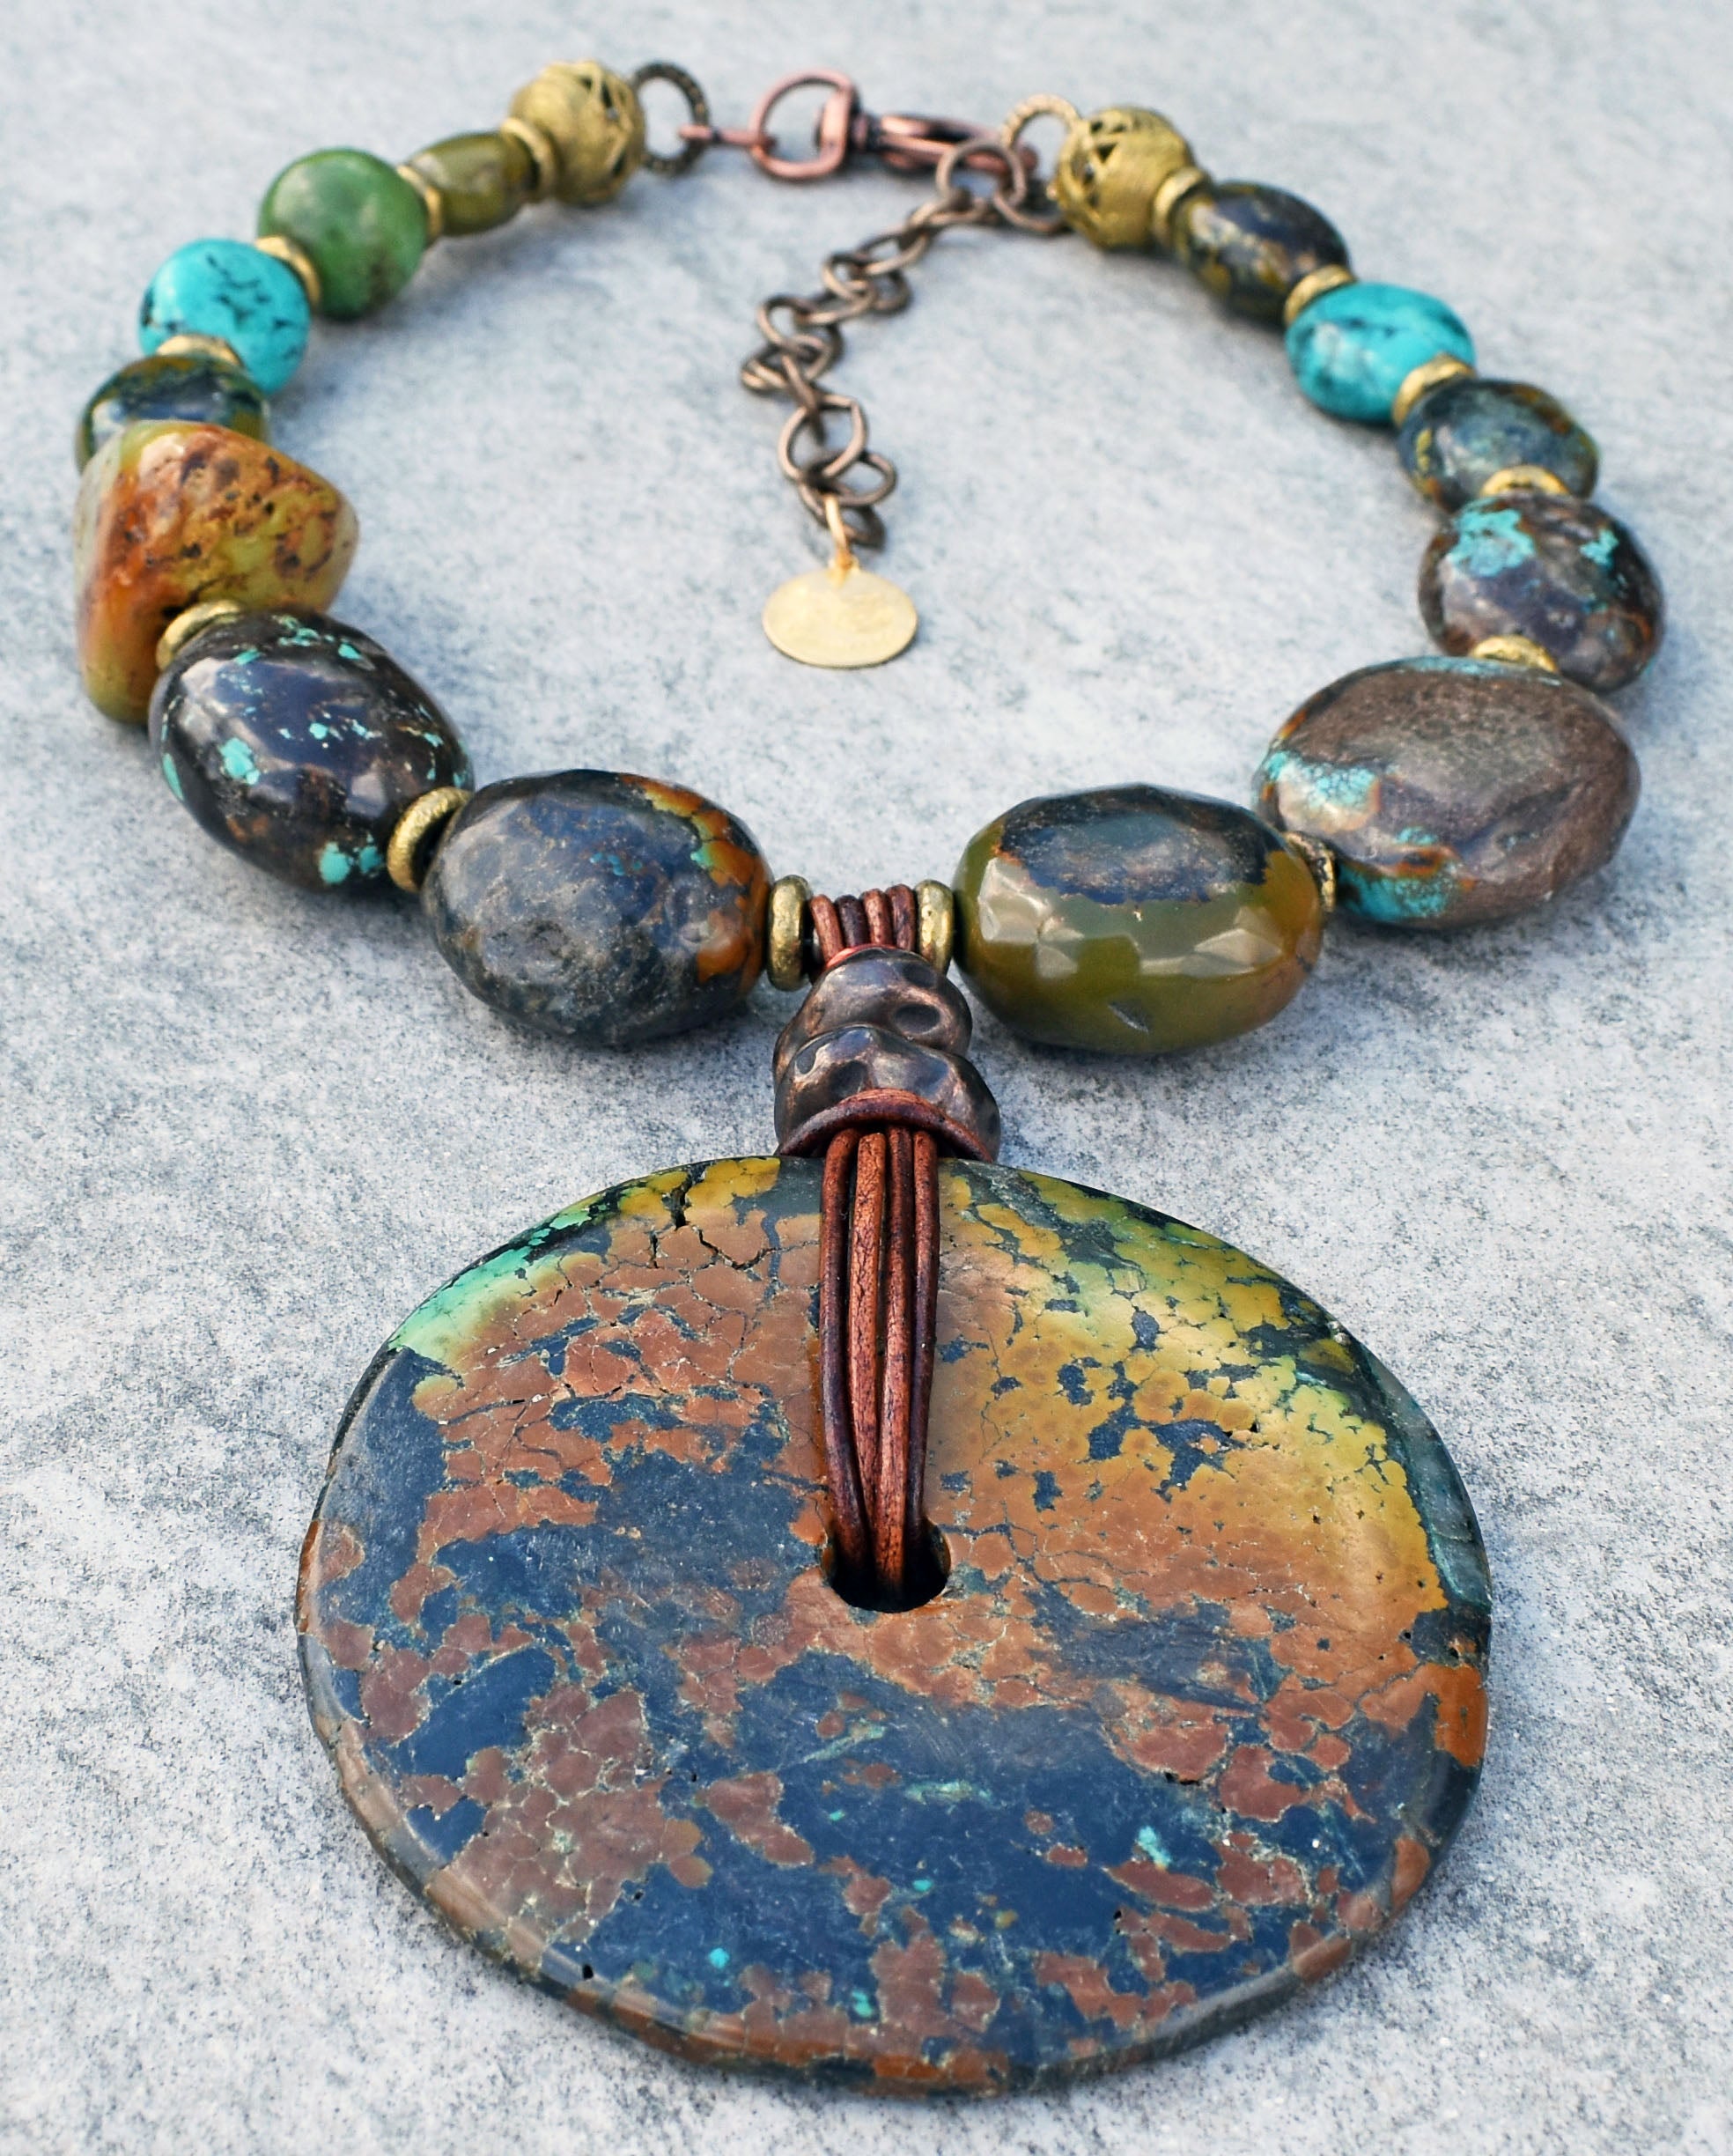 Enchanting and Bold Mixed Turquoise Stone and Disc Statement Necklace ...